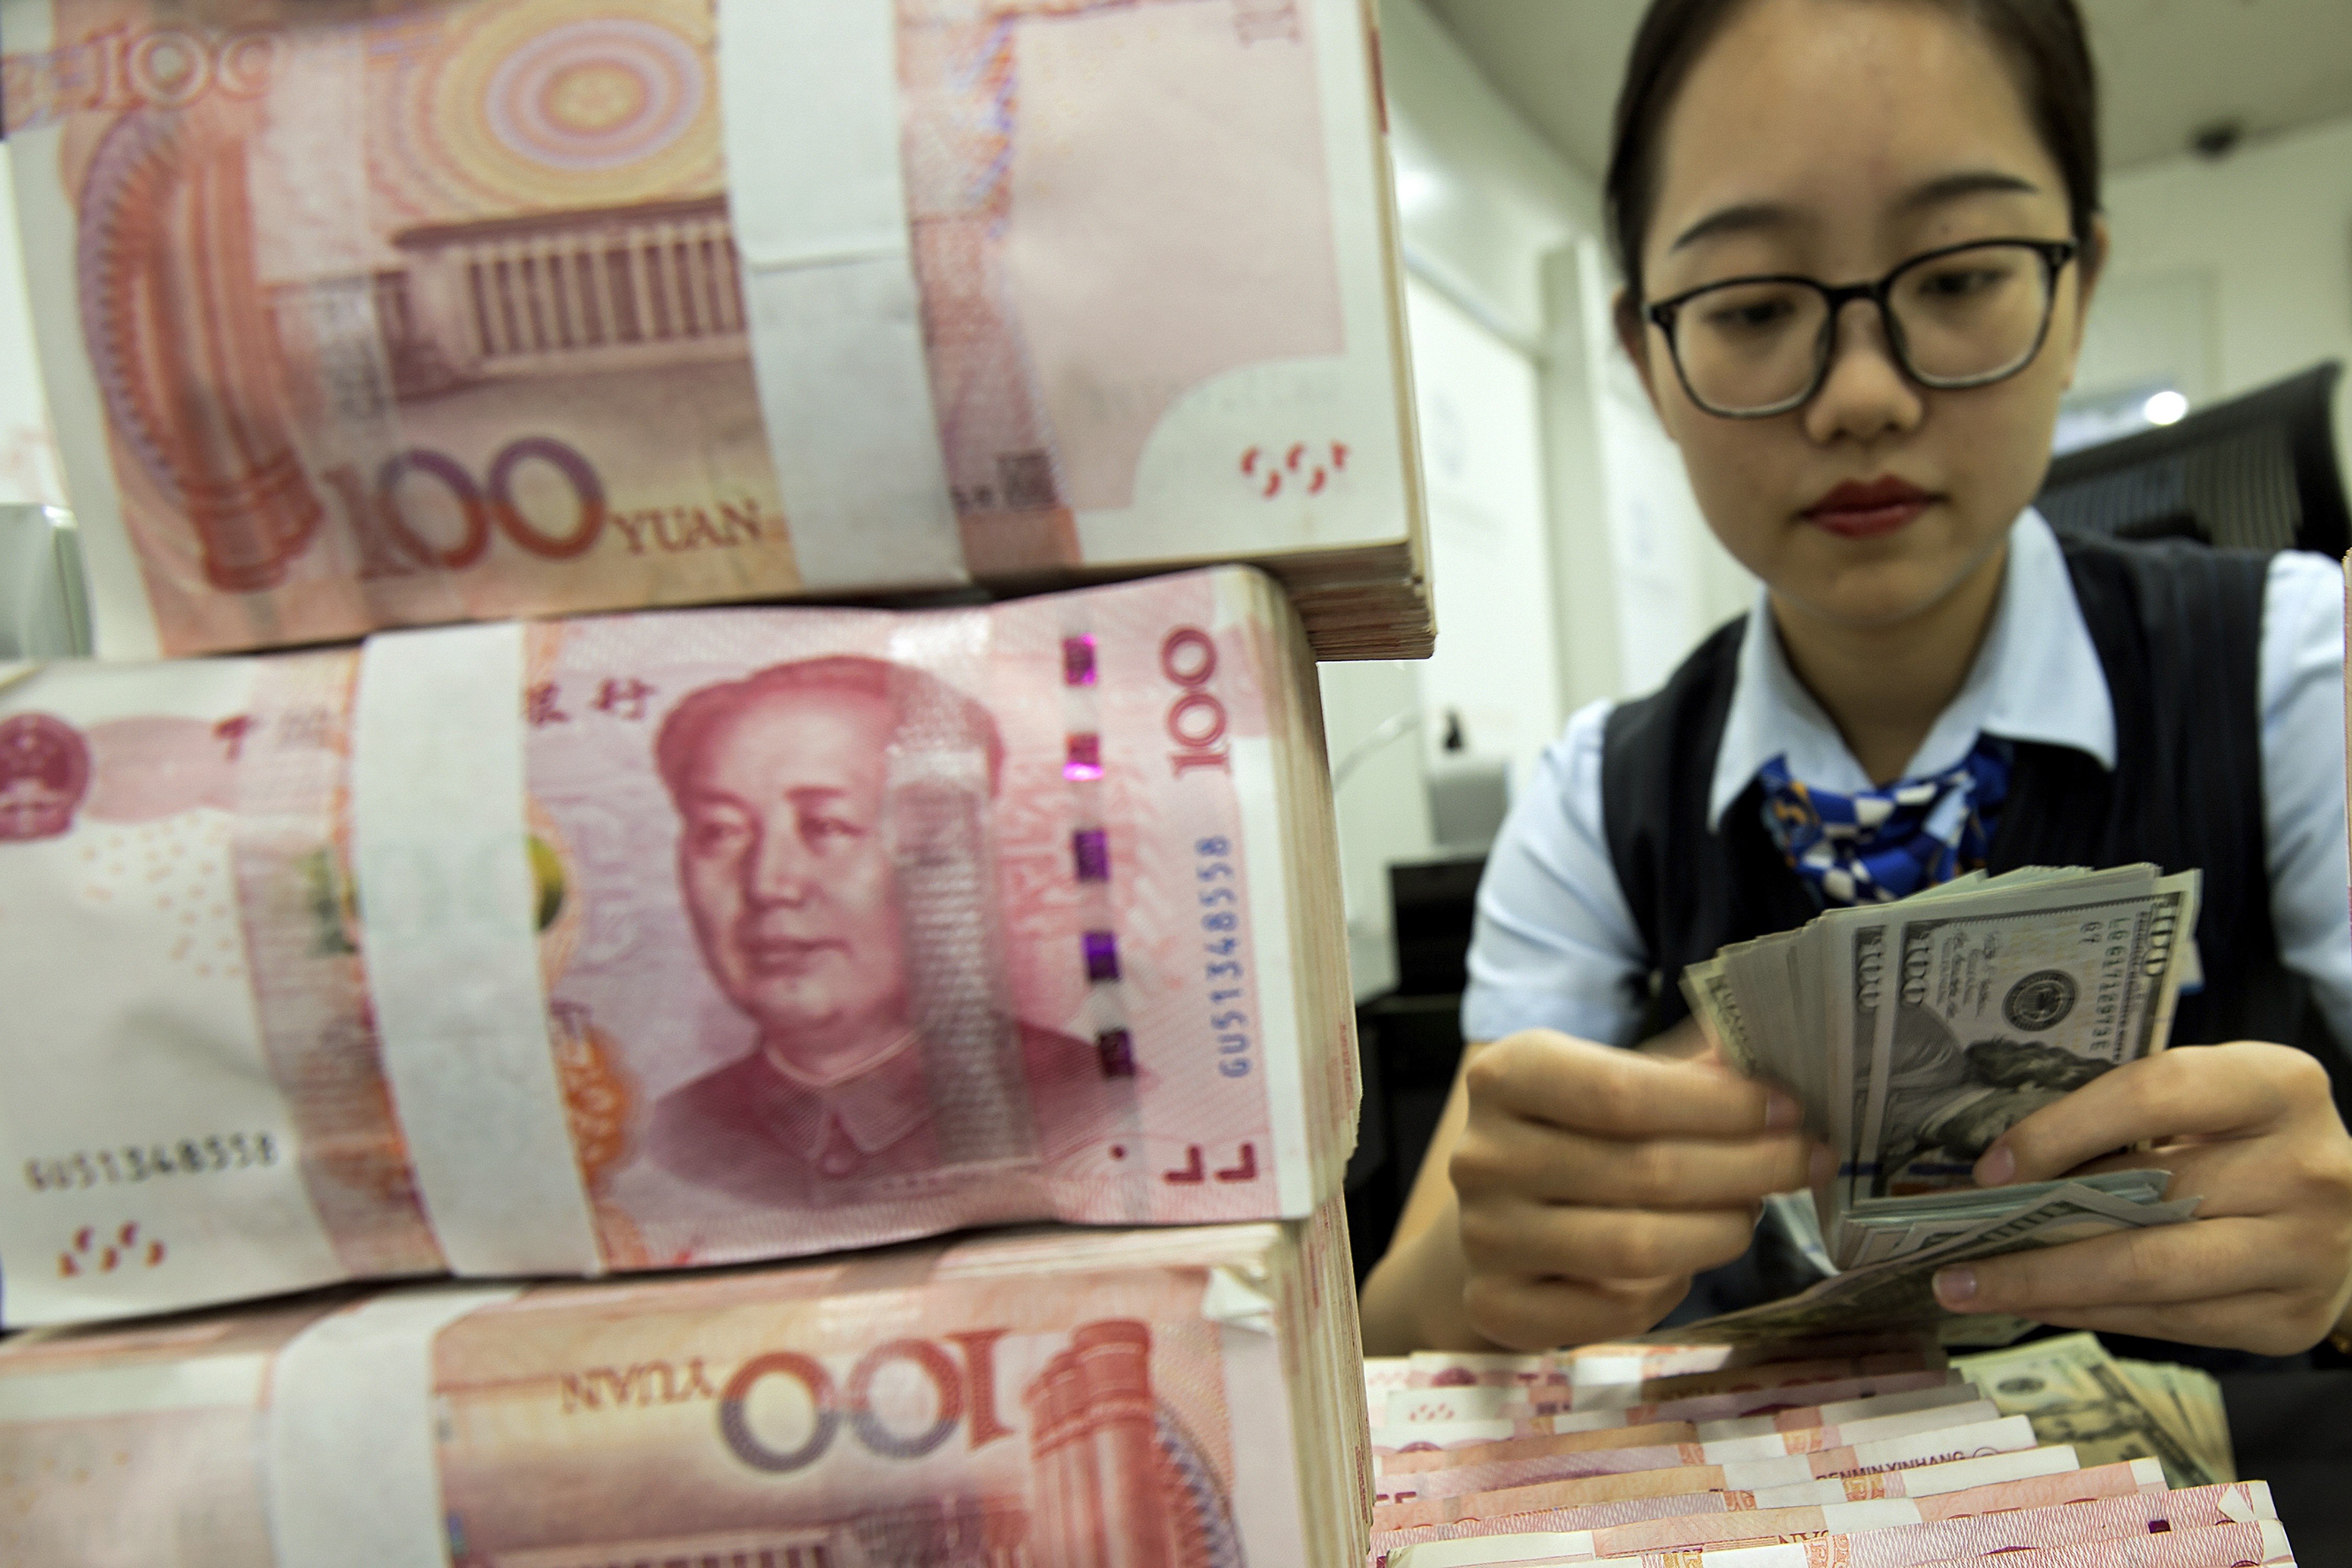 A bank employee in Haian, Jiangsu province, counts US dollar banknotes next to a stack of Chinese yuan notes. By accusing China of currency manipulation, the US is ignoring reality and applying double standards. Photo: Chinatopix via AP